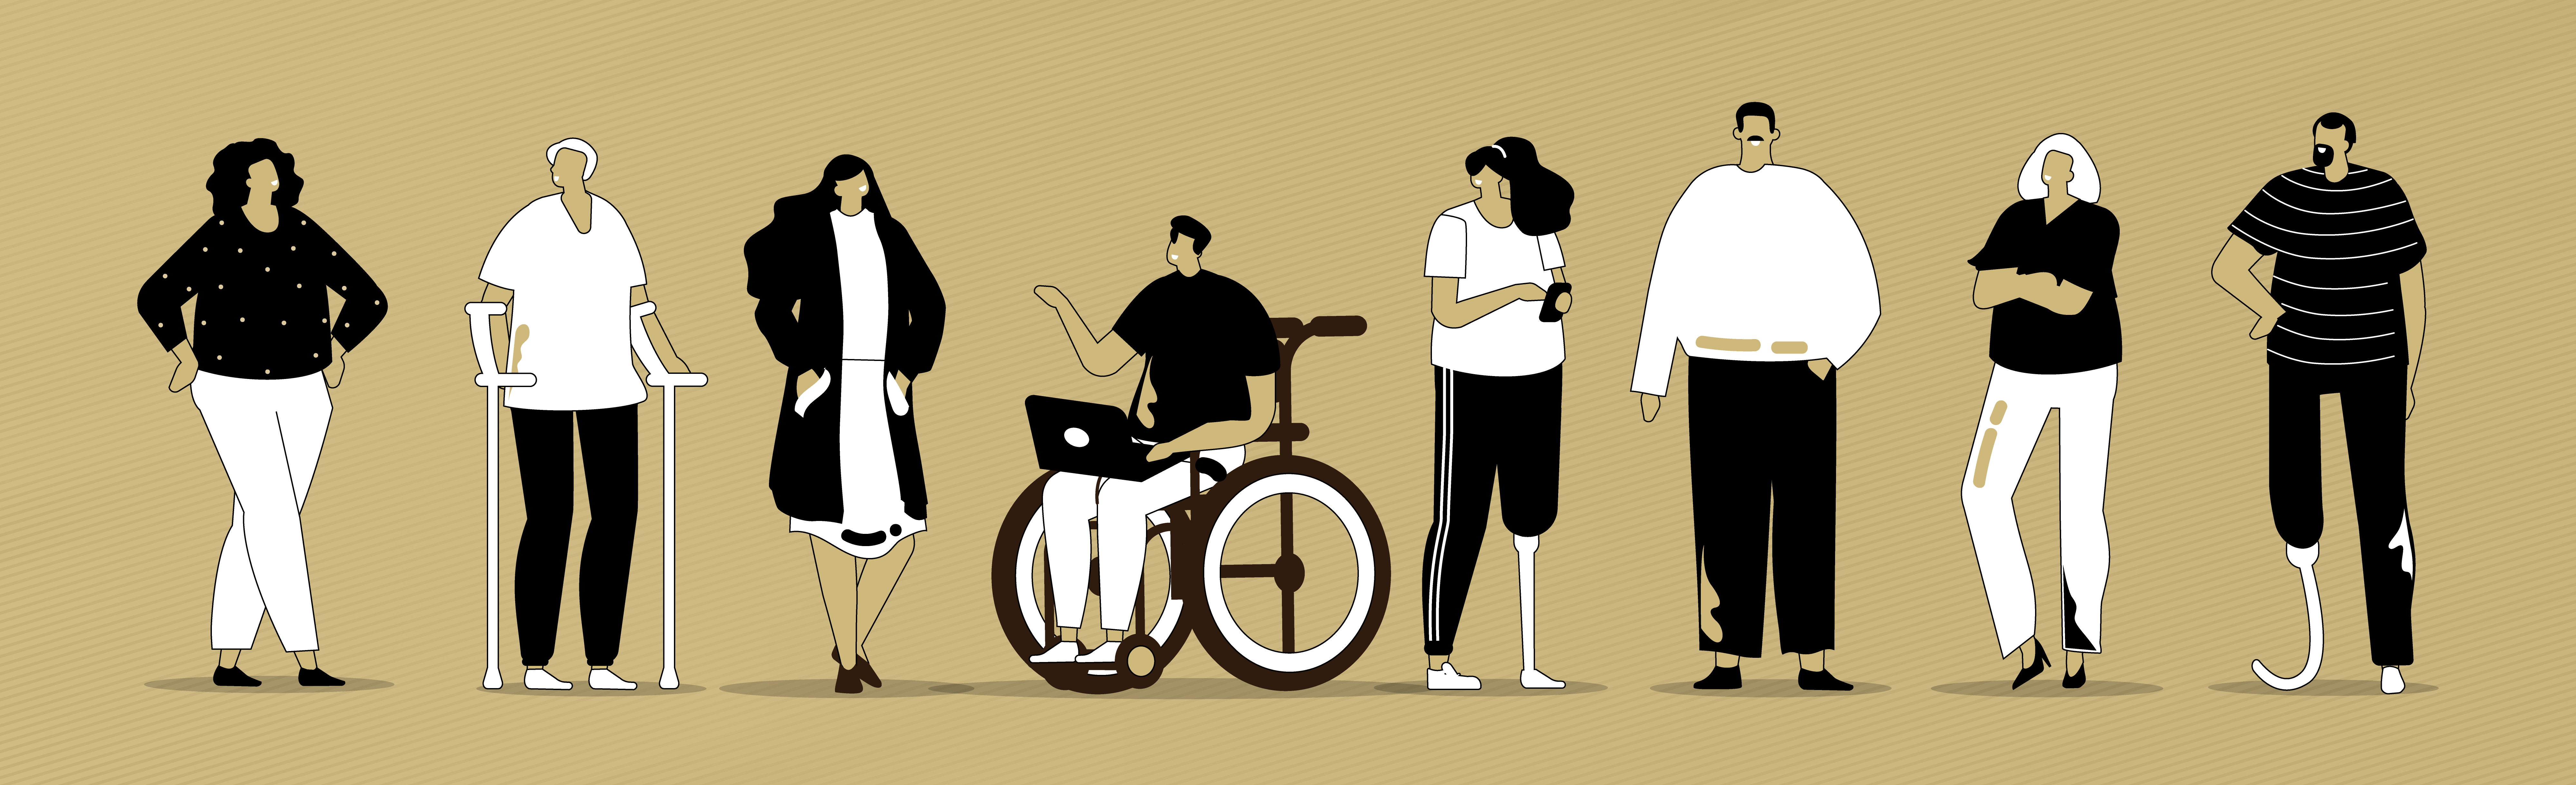 Graphic of people with disabilities